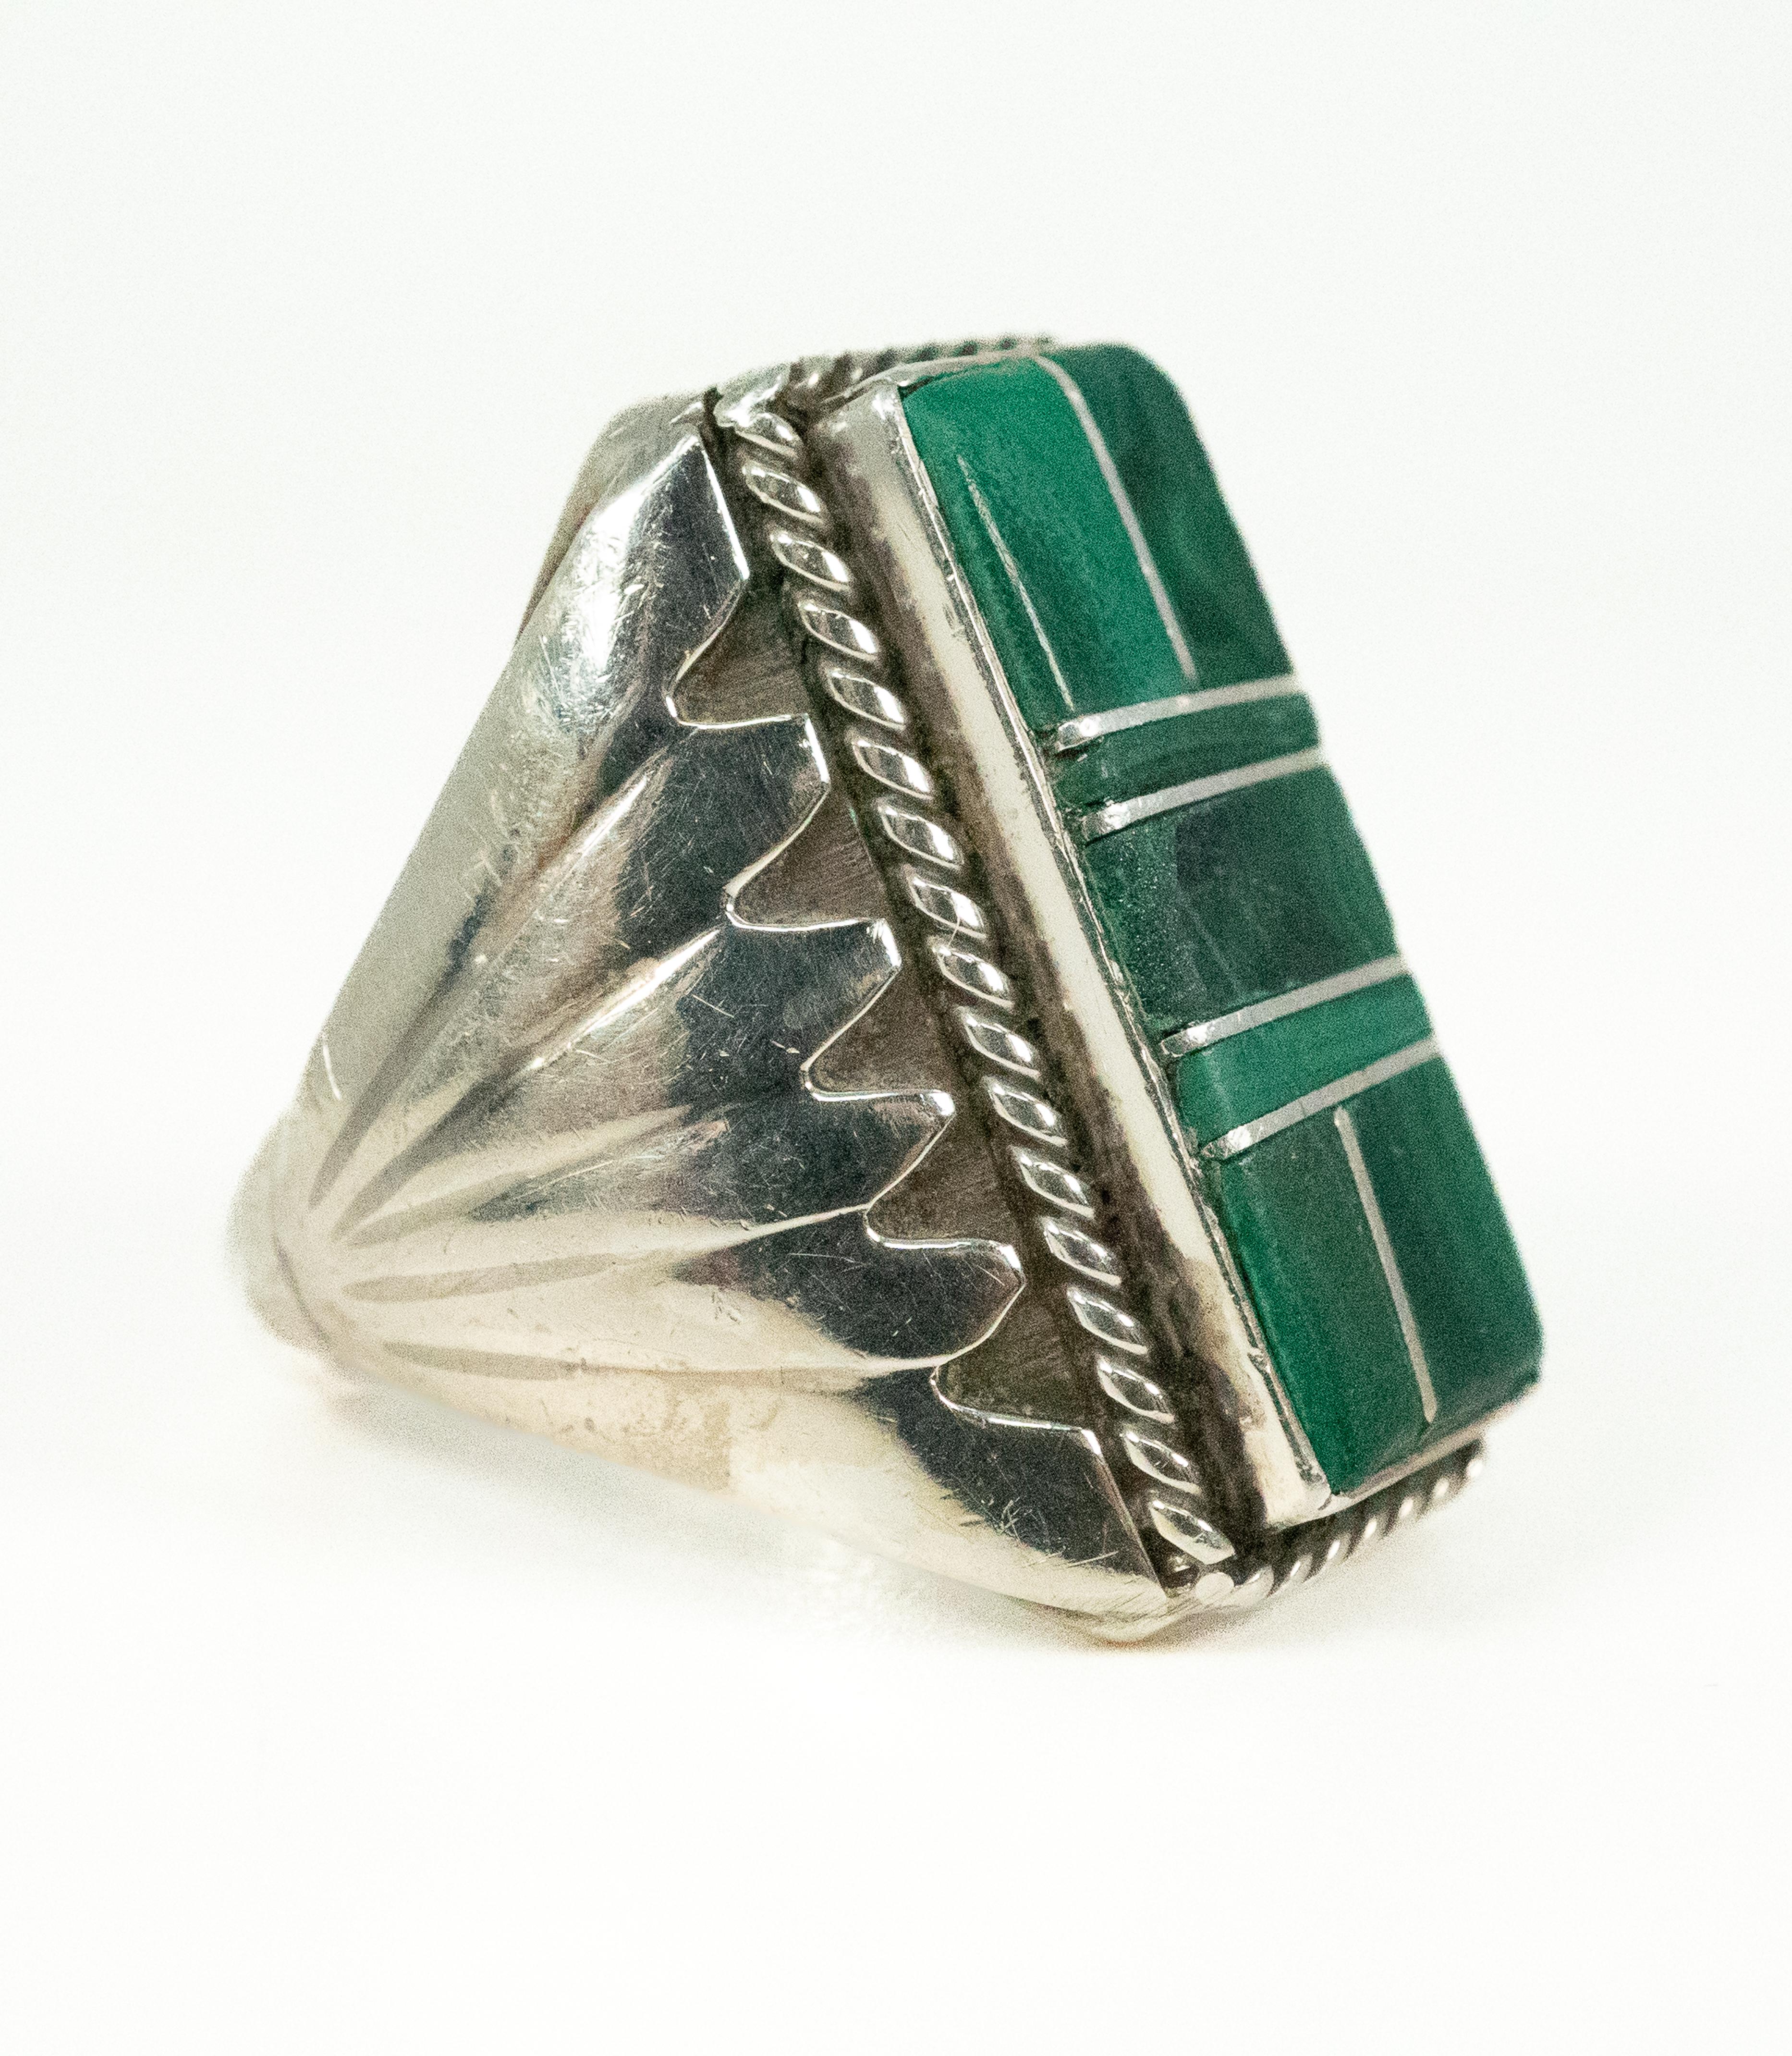 Composed of sterling silver, this malachite ring is just lovely!